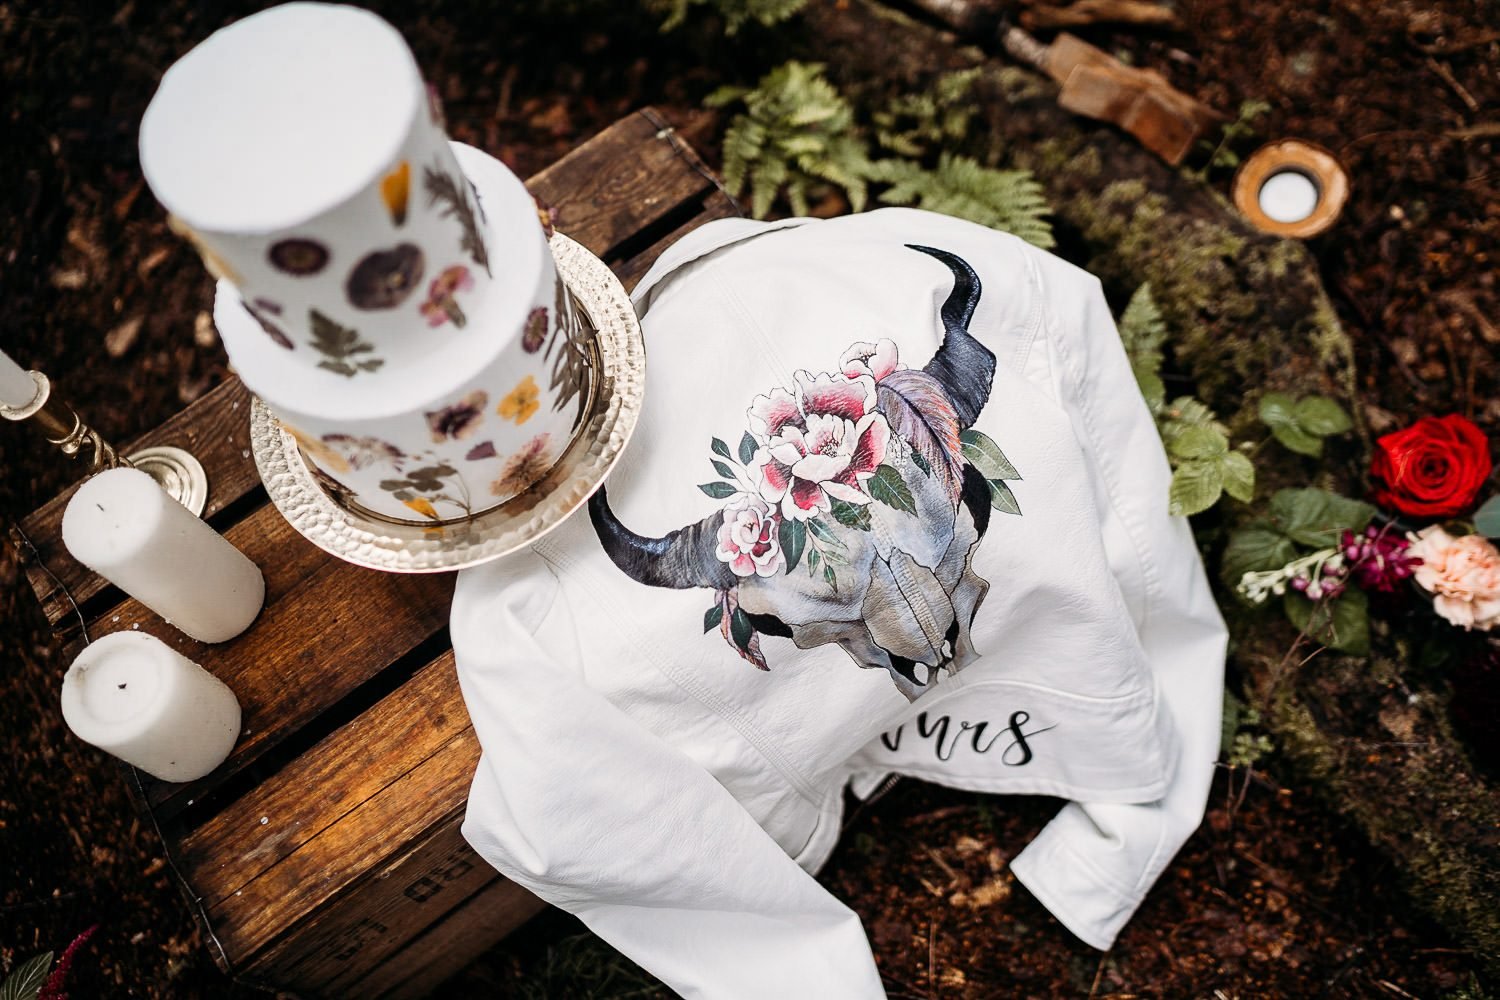 handpainted white leather bride jacket with deer skull and flowers